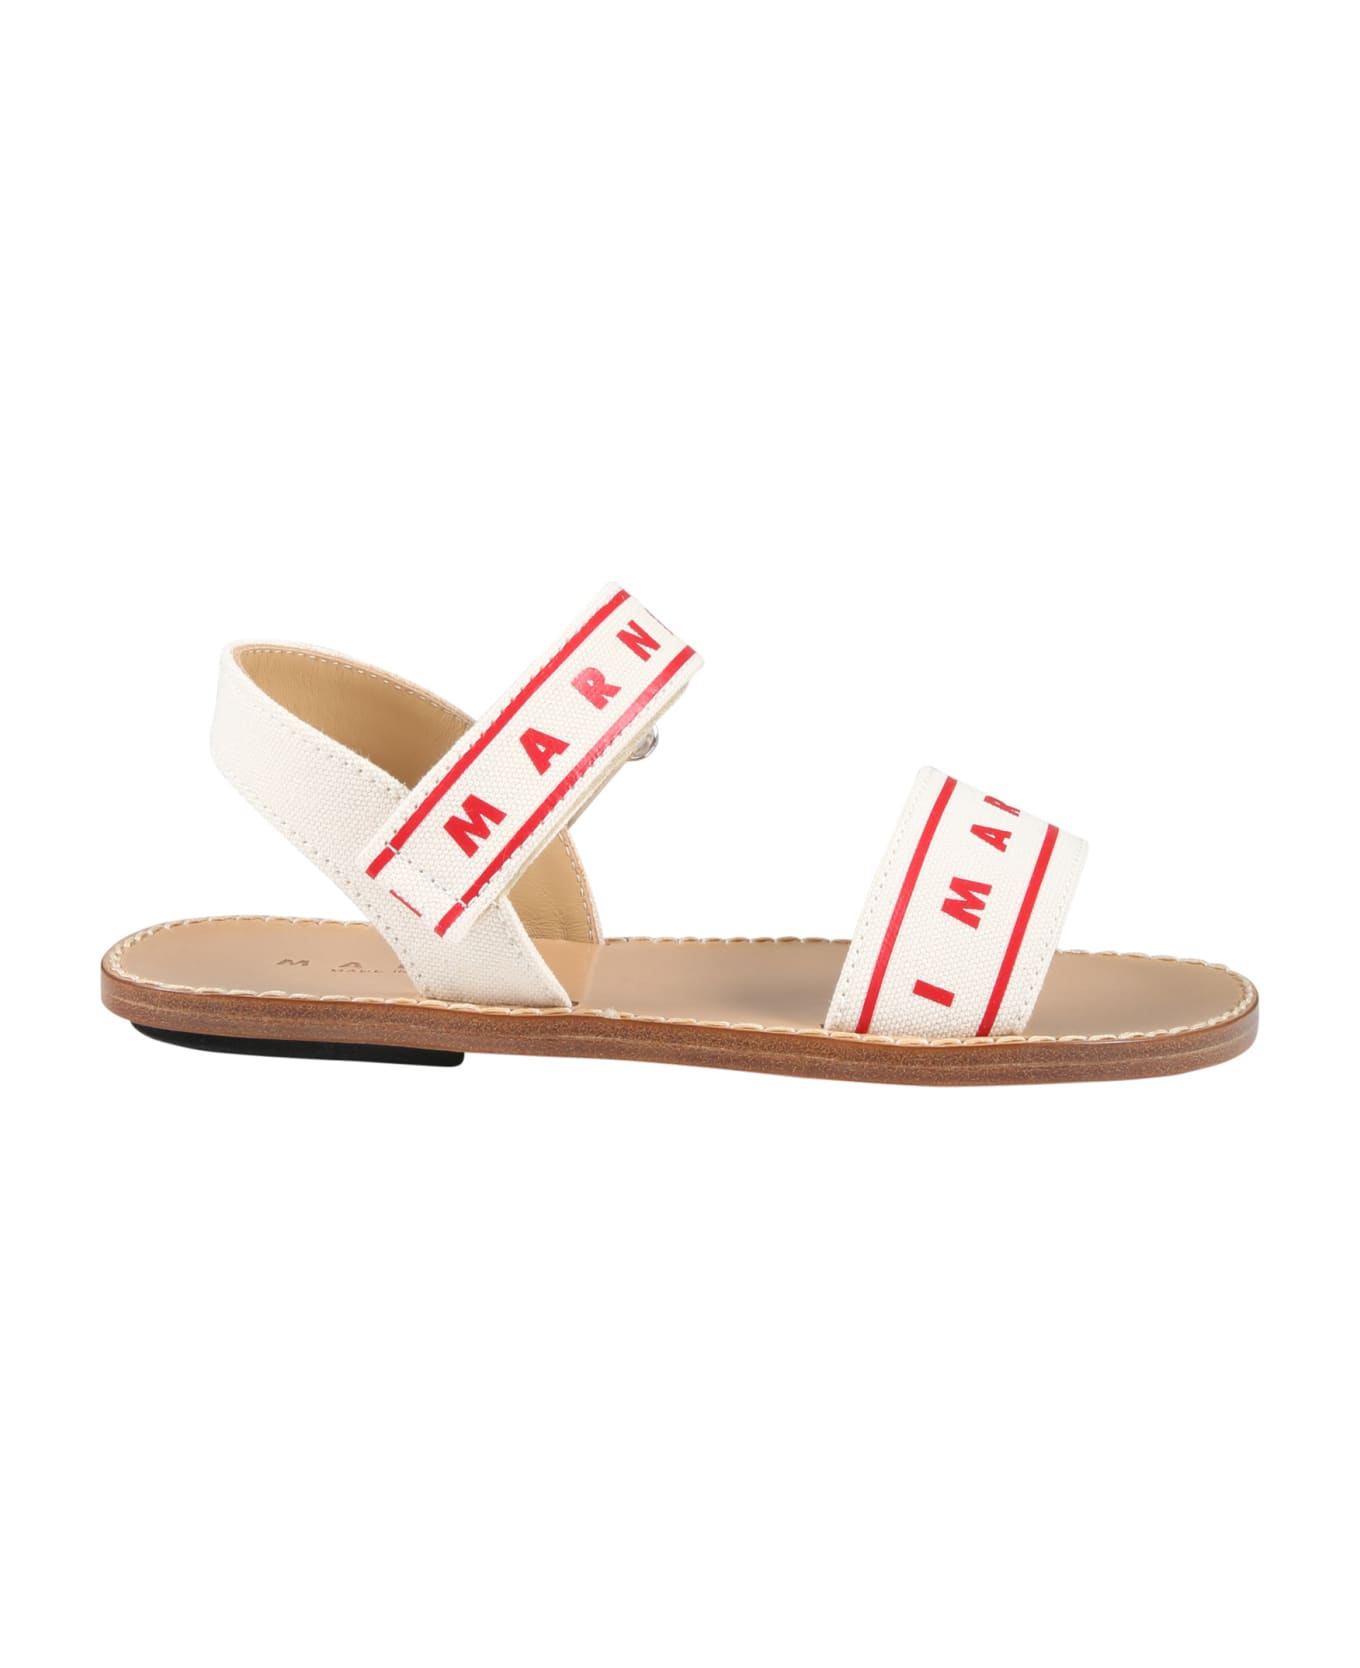 Marni Multicolor Sandals For Girl With Red Logo - Multicolor